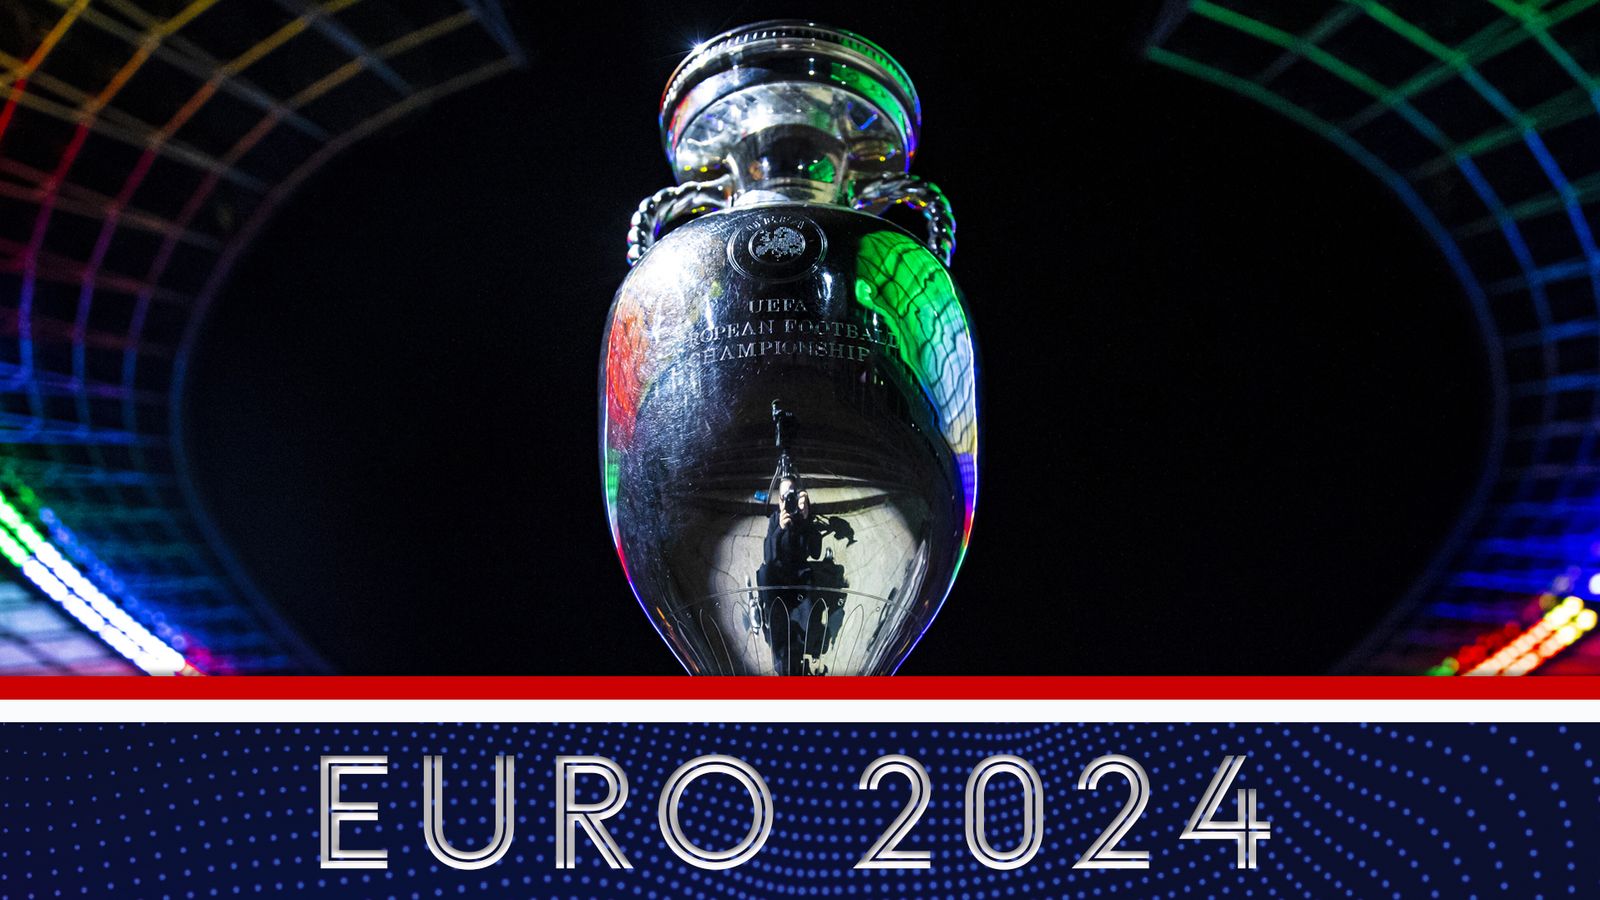 Euro 2024 fixtures, schedule, groups, venues All you need to know